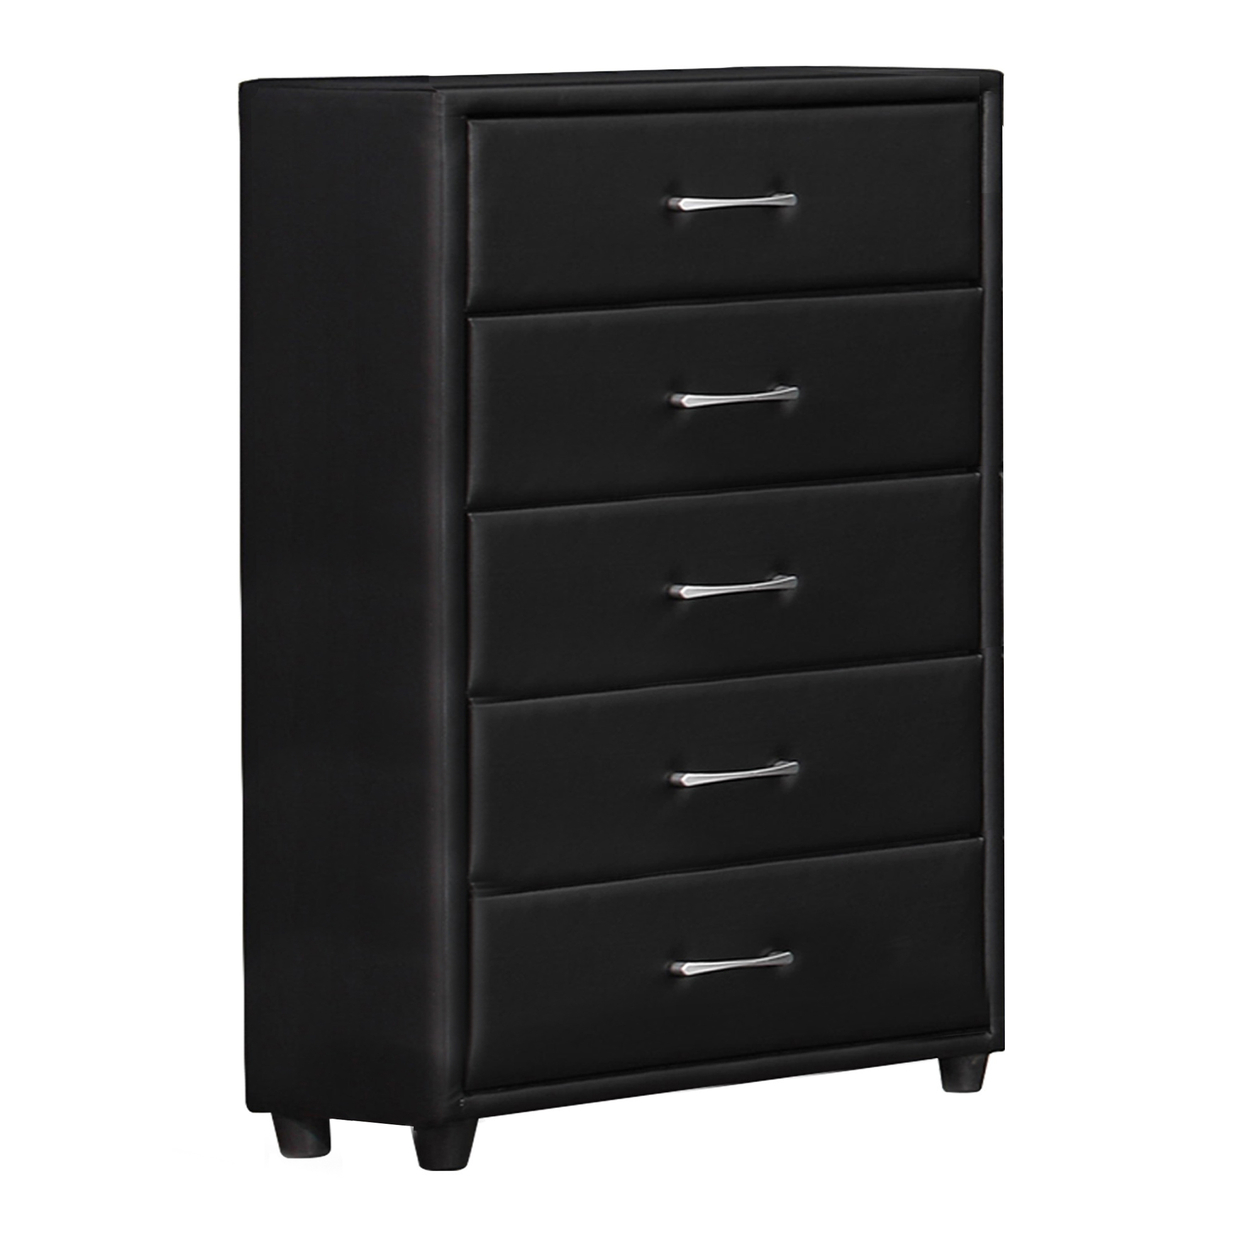 5 Drawer Leatherette Wooden Frame Chest With Tapered Legs, Black- Saltoro Sherpi